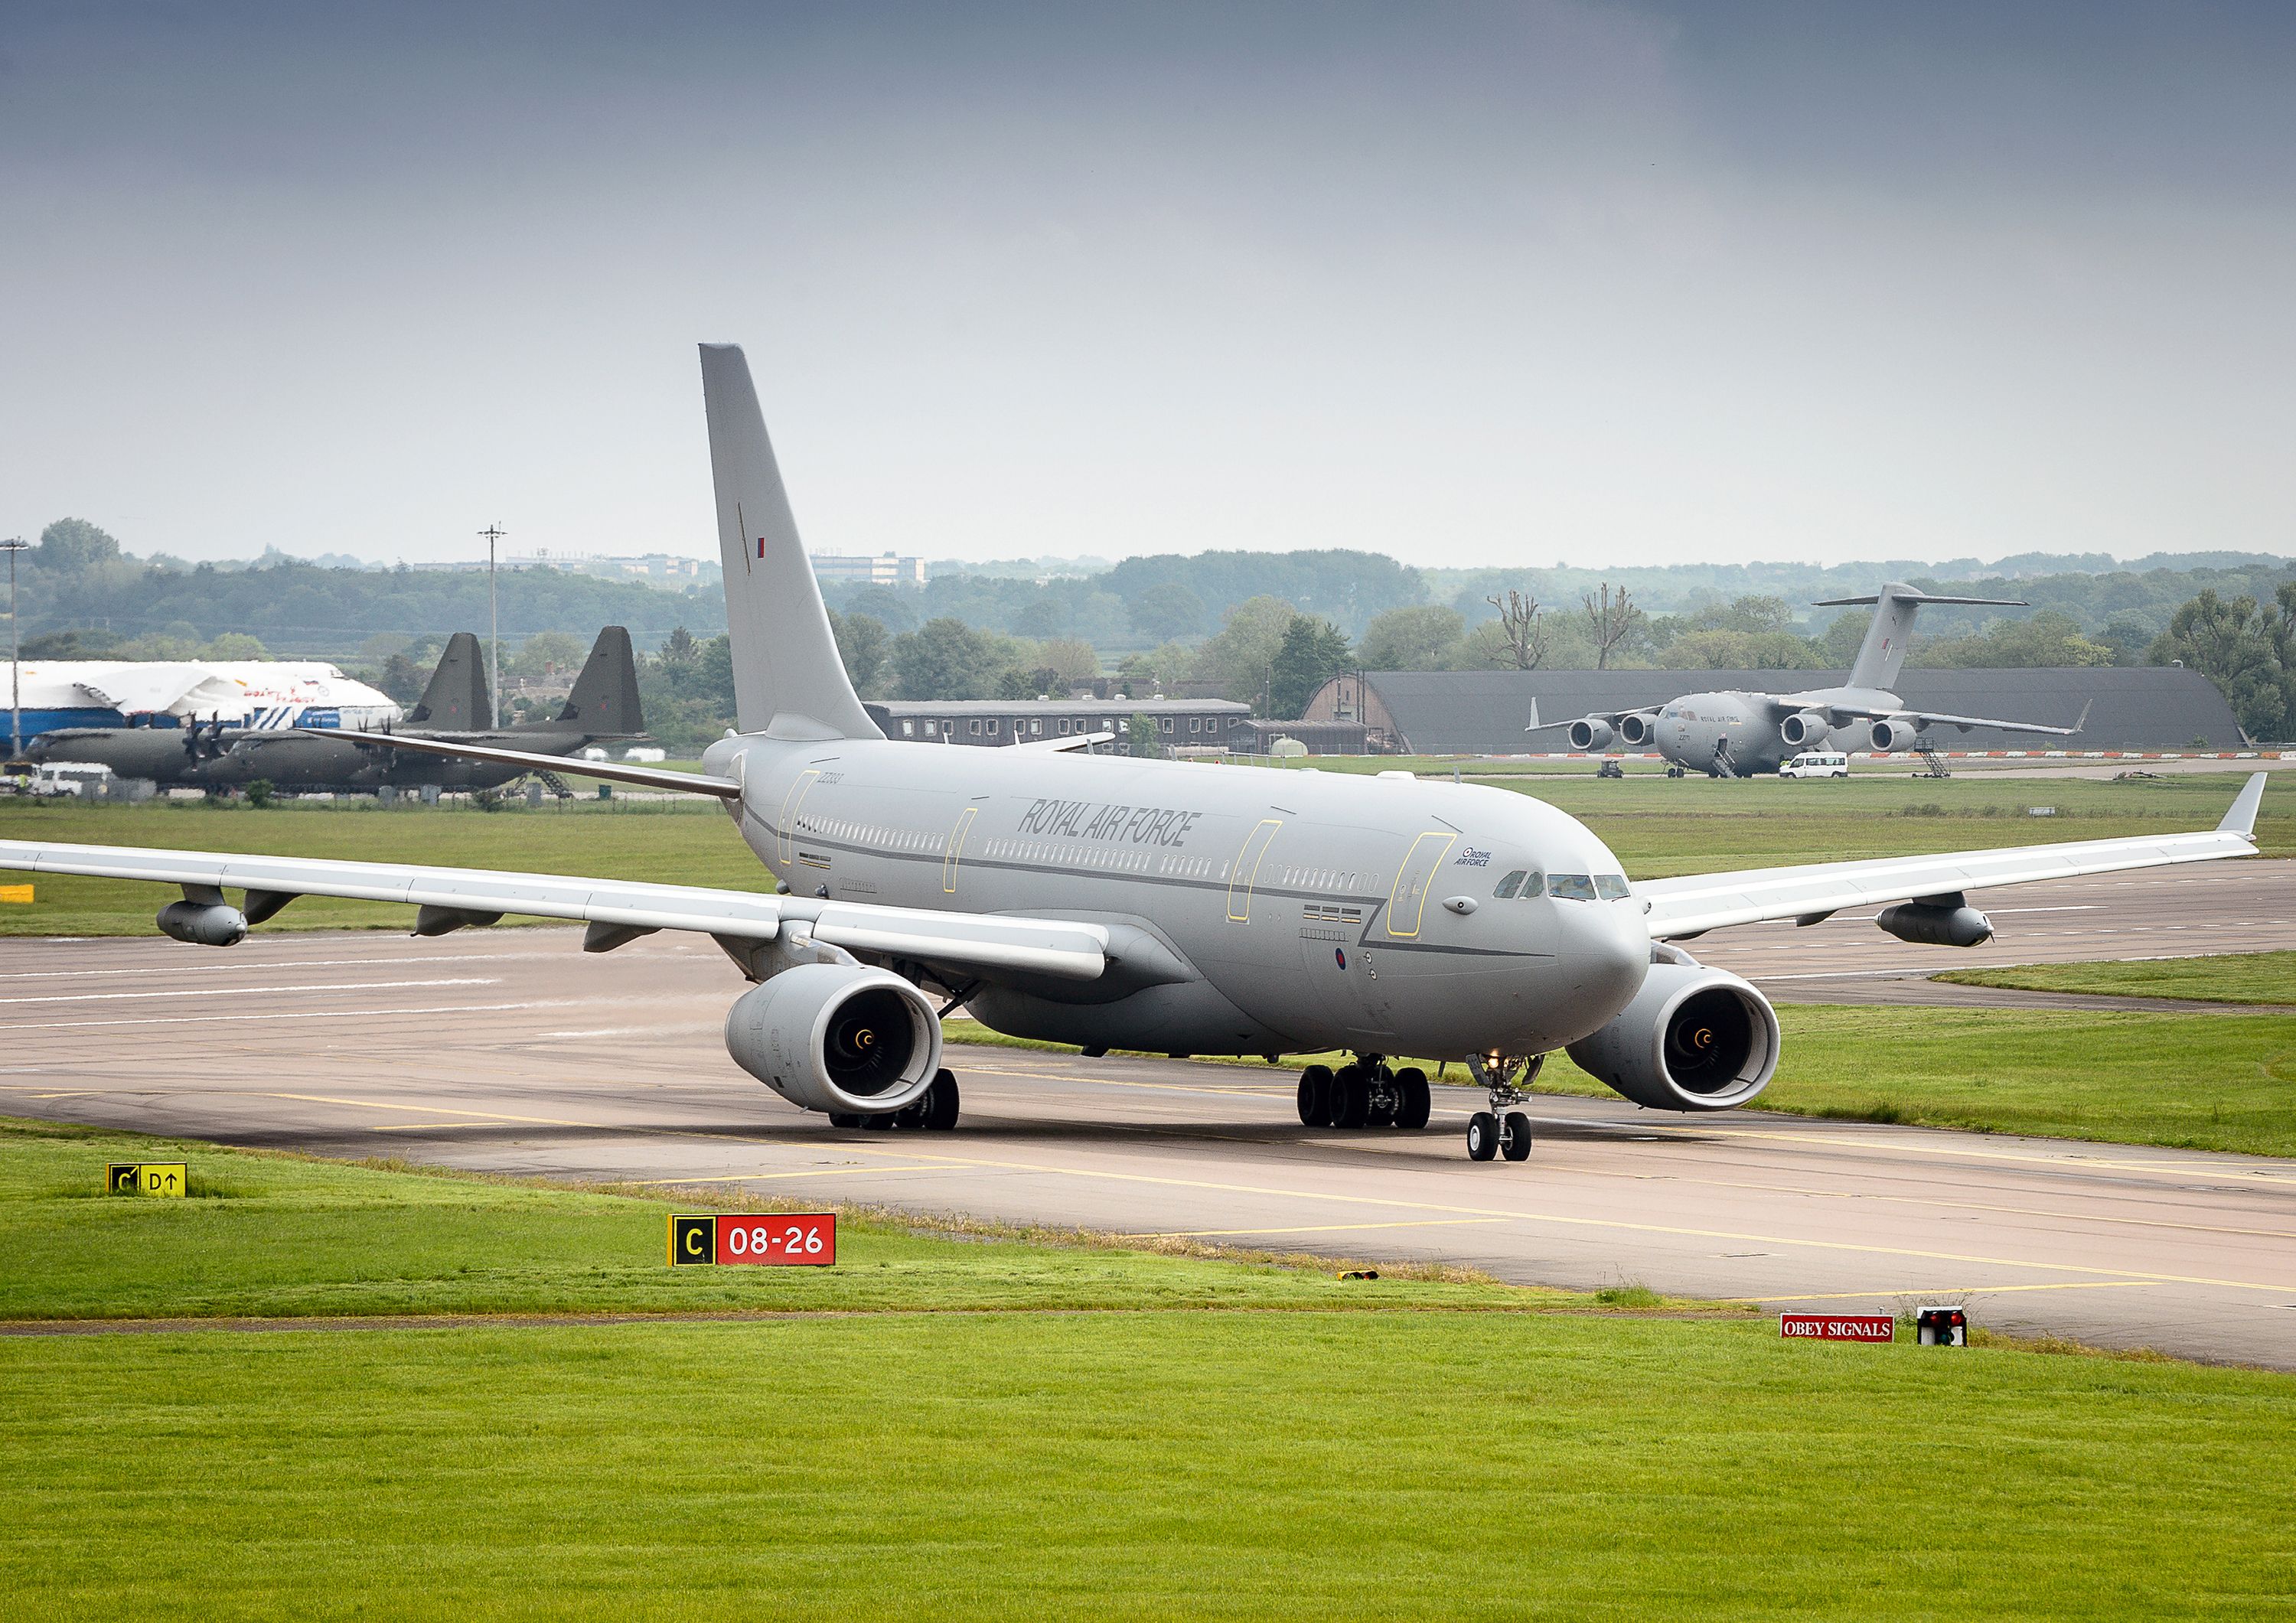 Brize Norton: A Brief Guide To The UK's Largest RAF Station